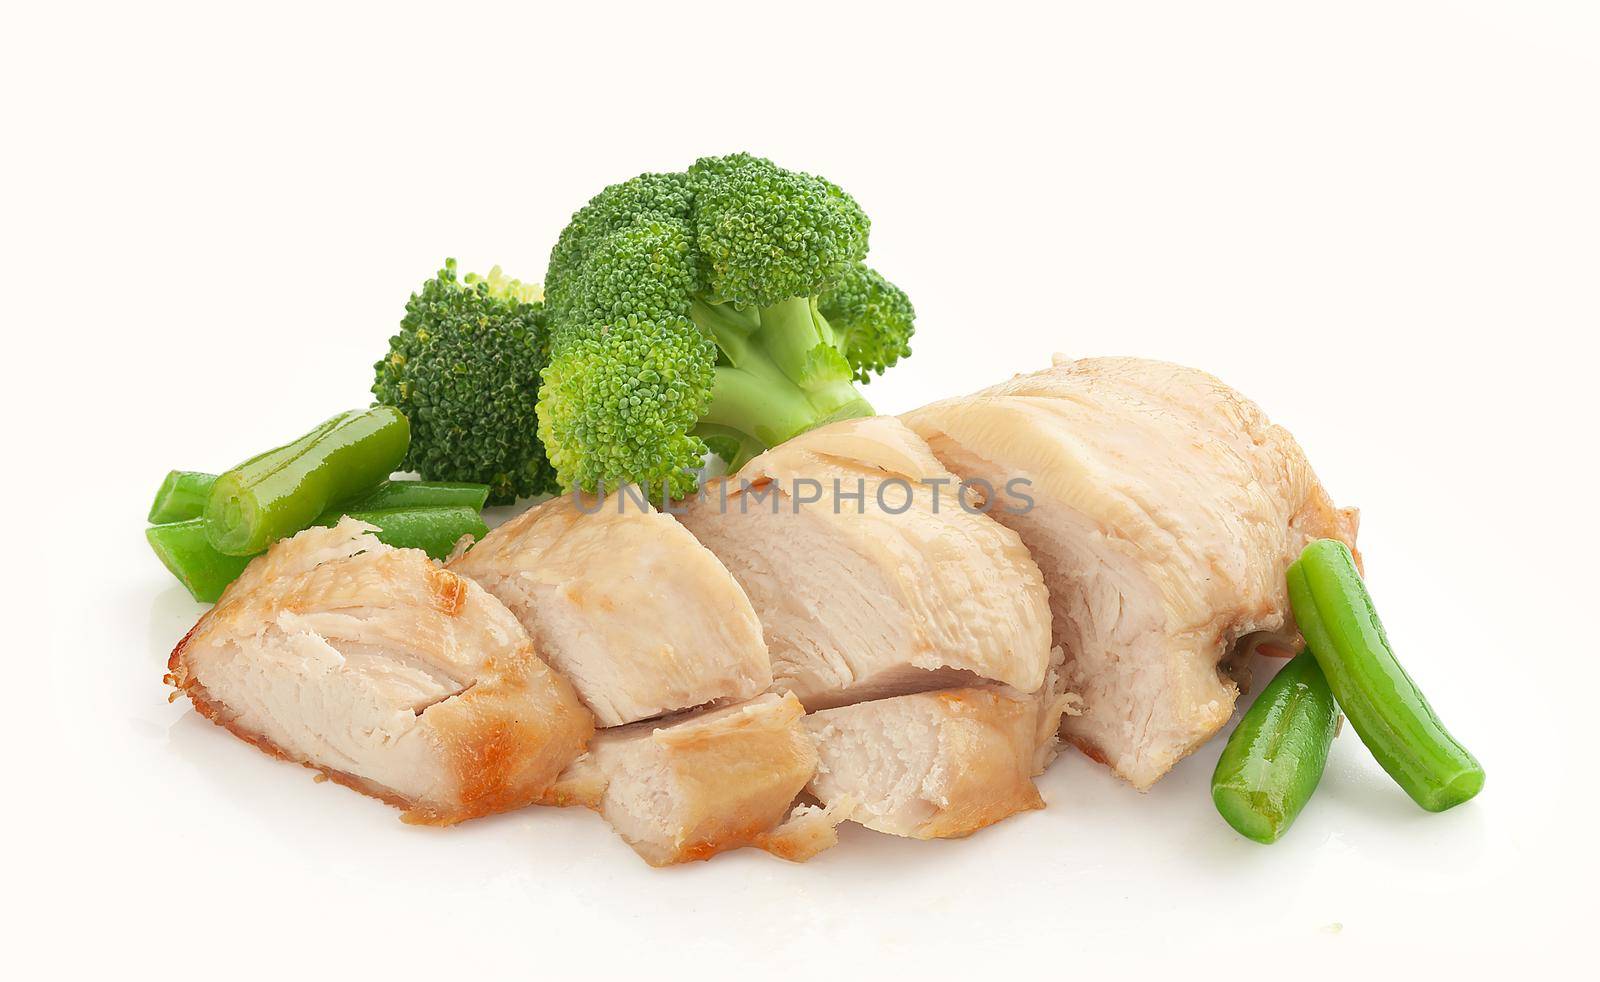 Baked chicken breast with broccoli and green bean